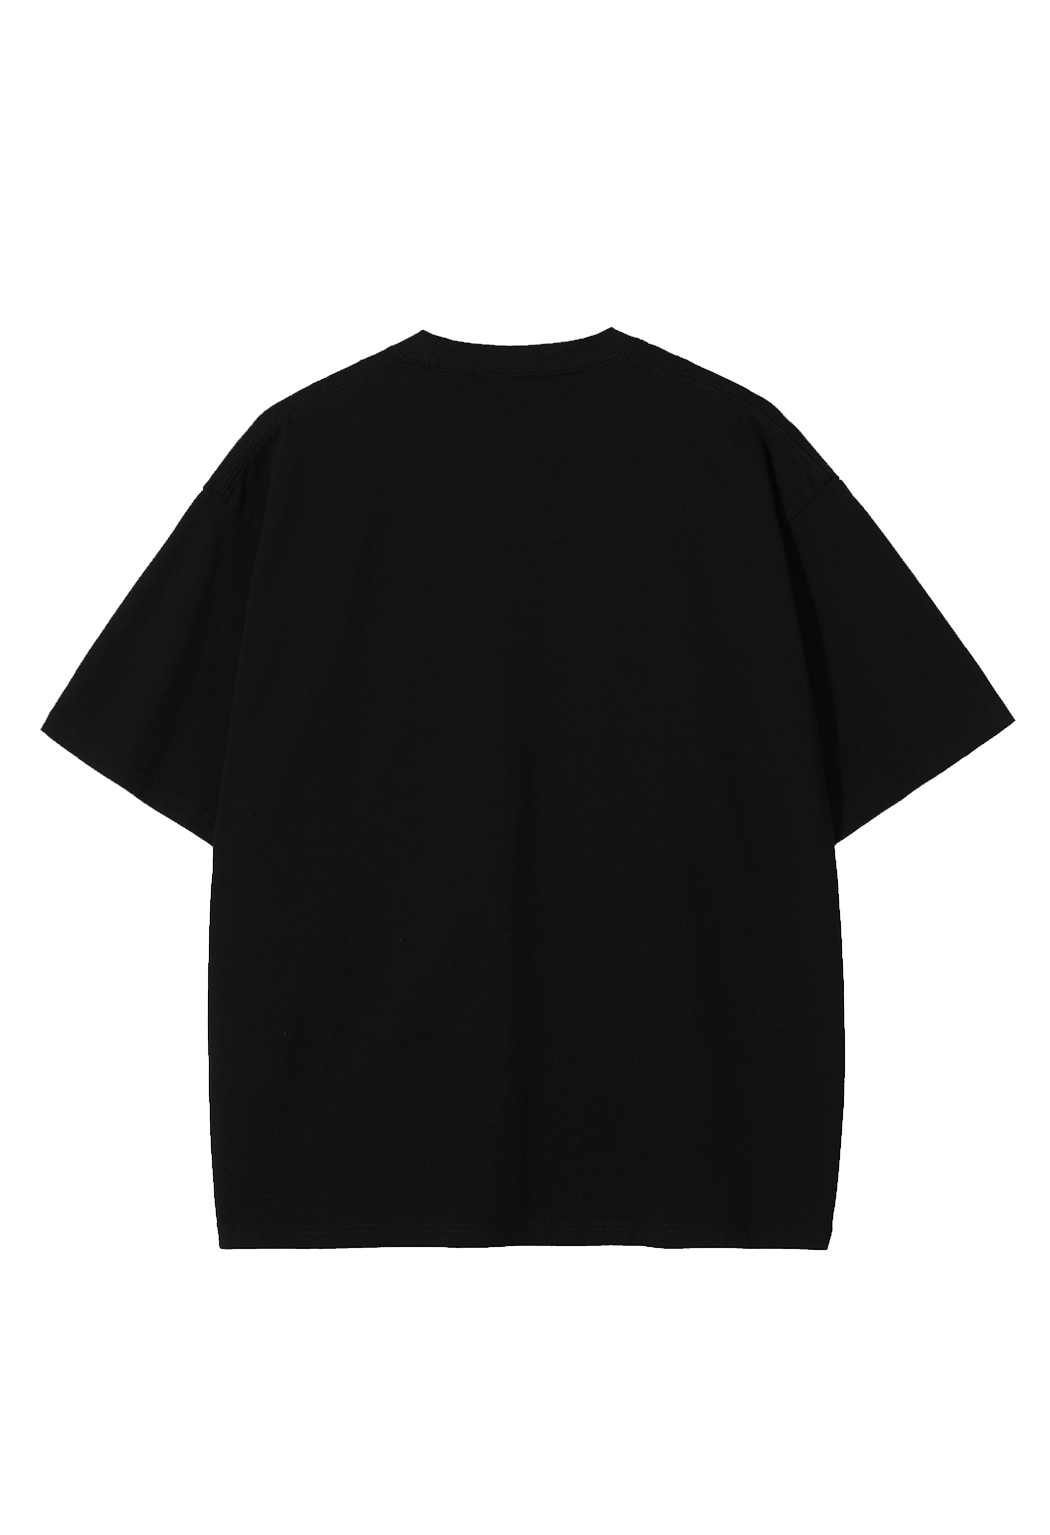 Blank T Shirt Wholesale Supplier In Portugal